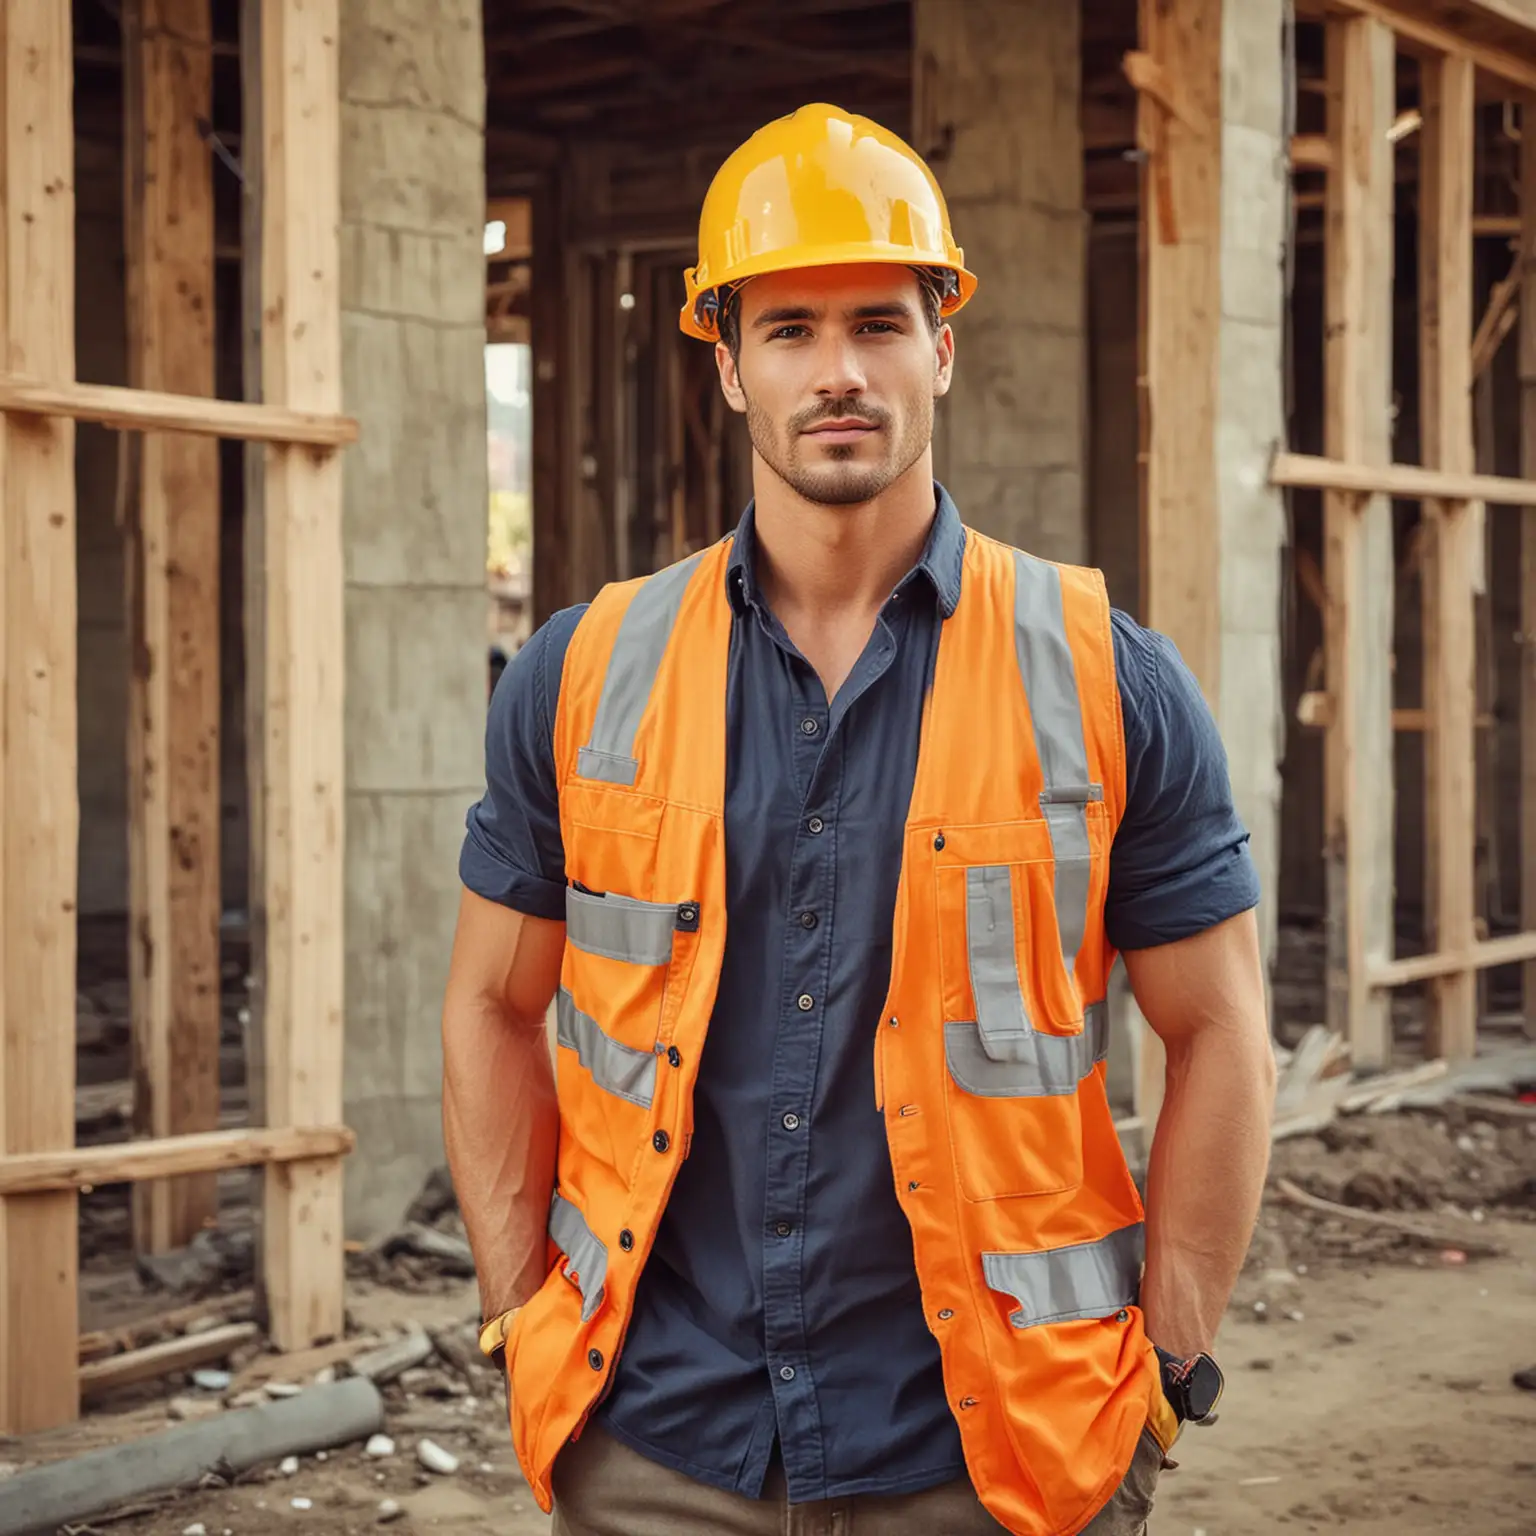 Handsome Construction Worker Operating Heavy Machinery on Construction Site